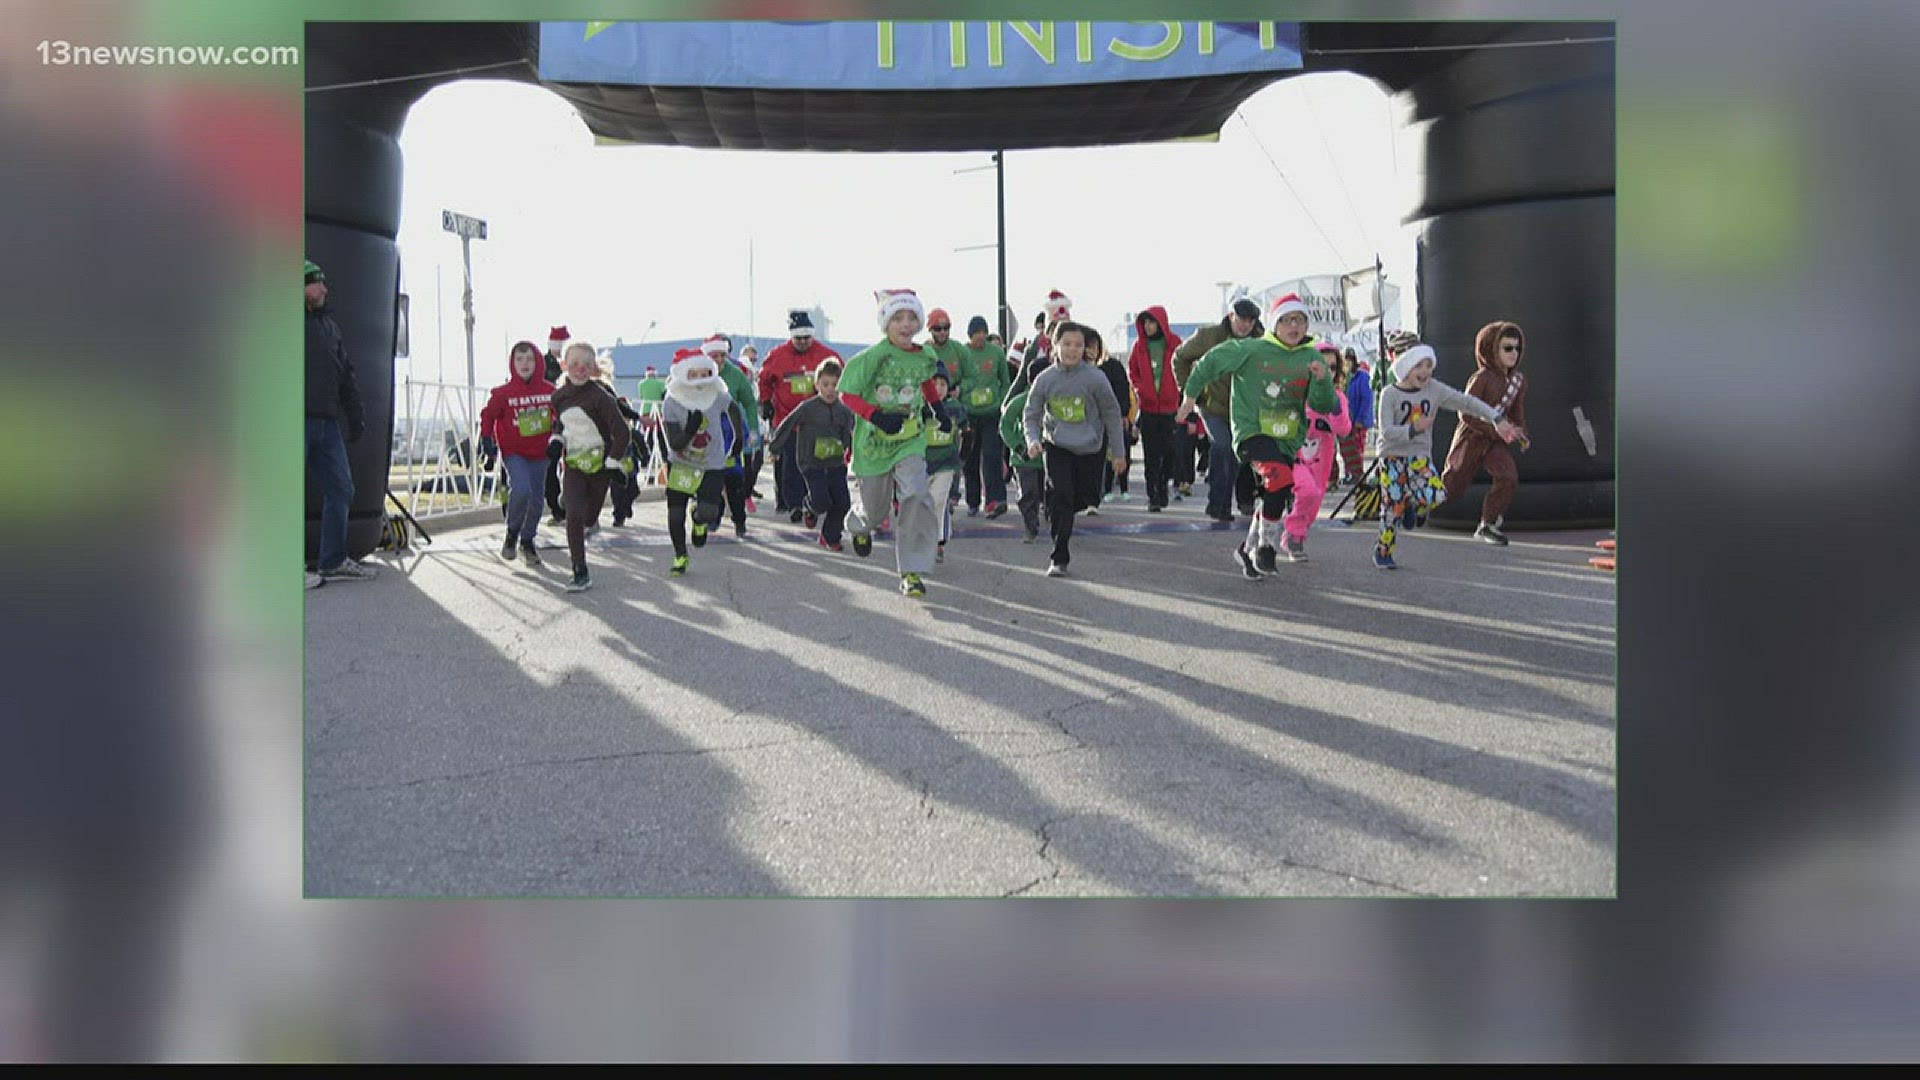 On December 10th, hundreds of runners will be lacing up to hit the streets of historic Olde Towne Portsmouth.